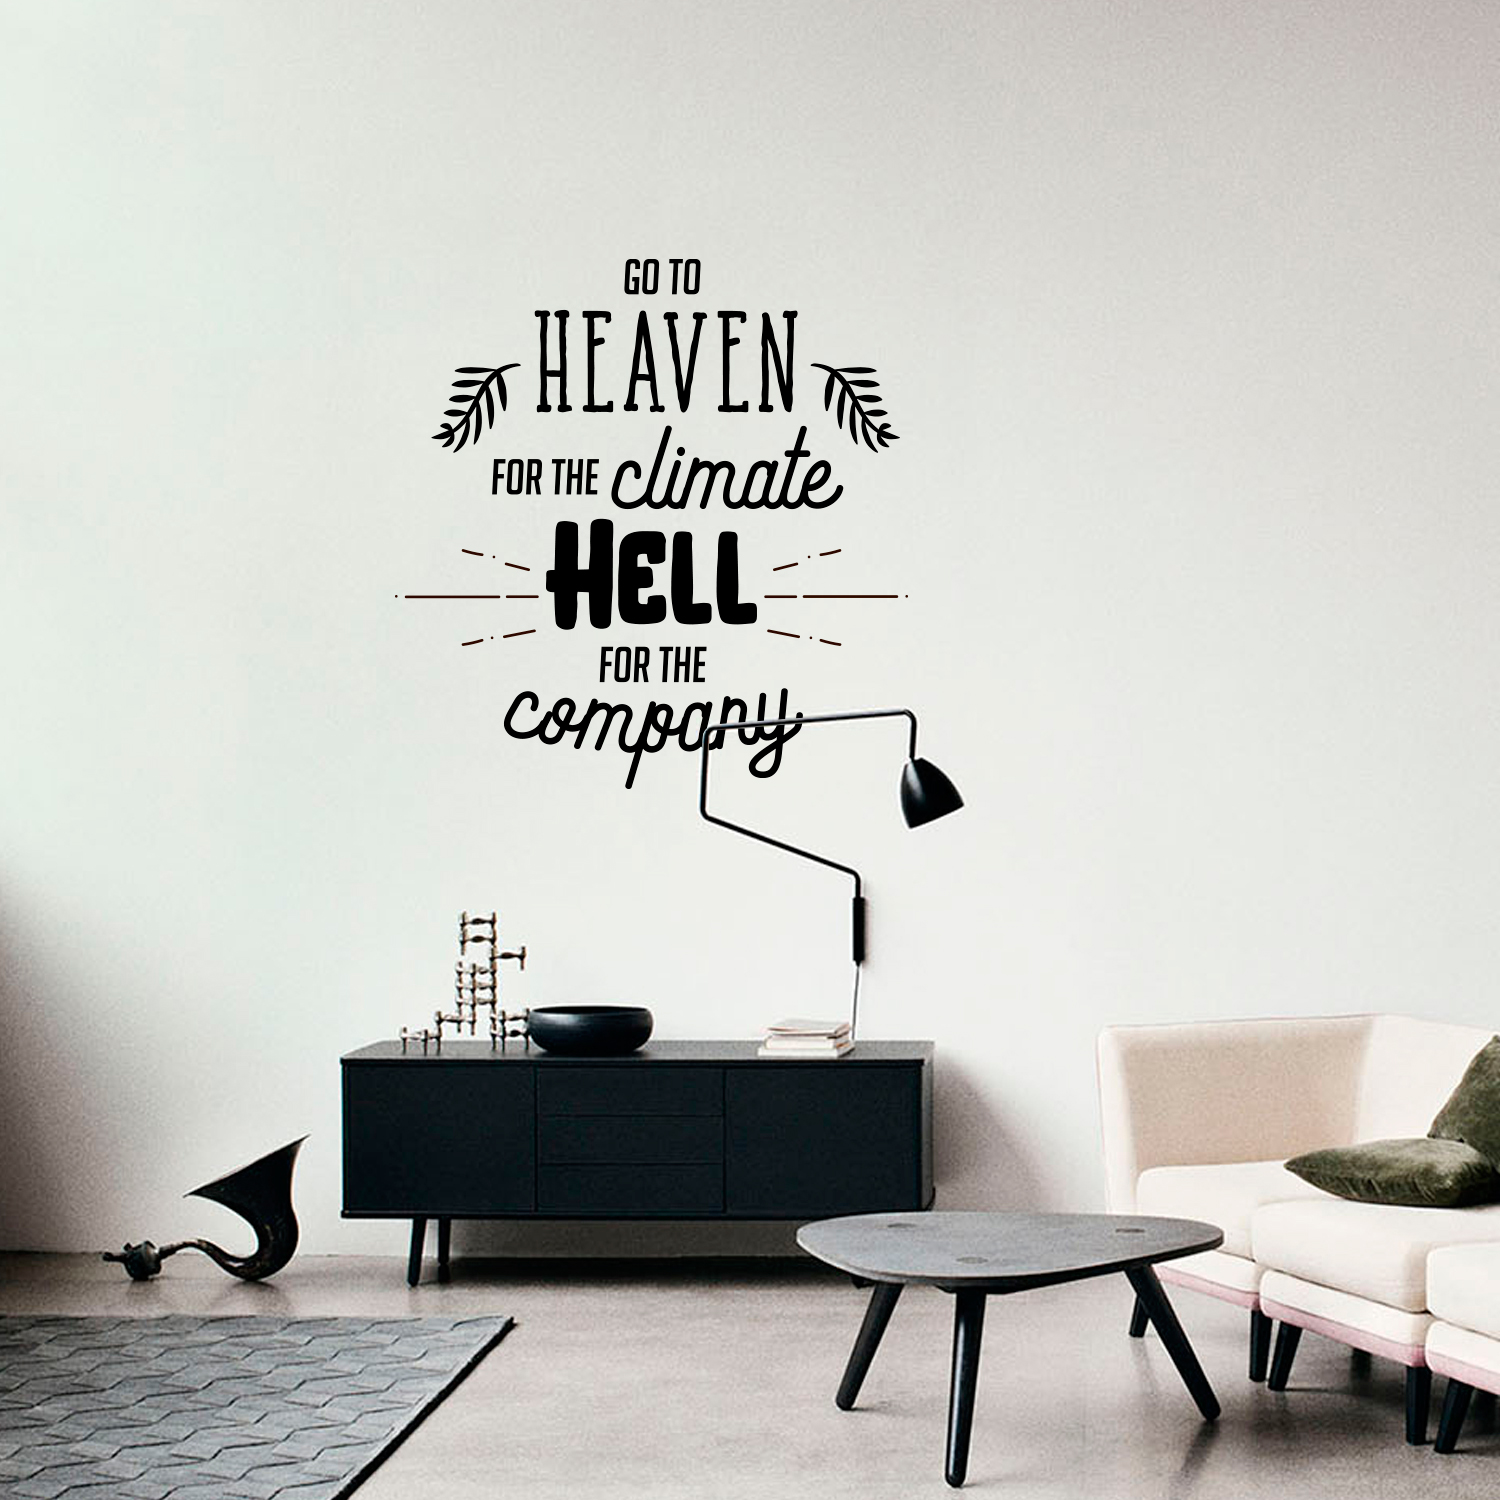 Vinyl Wall Art Decal Go To Heaven For The Climate Hell For The Company 23 X Ebay